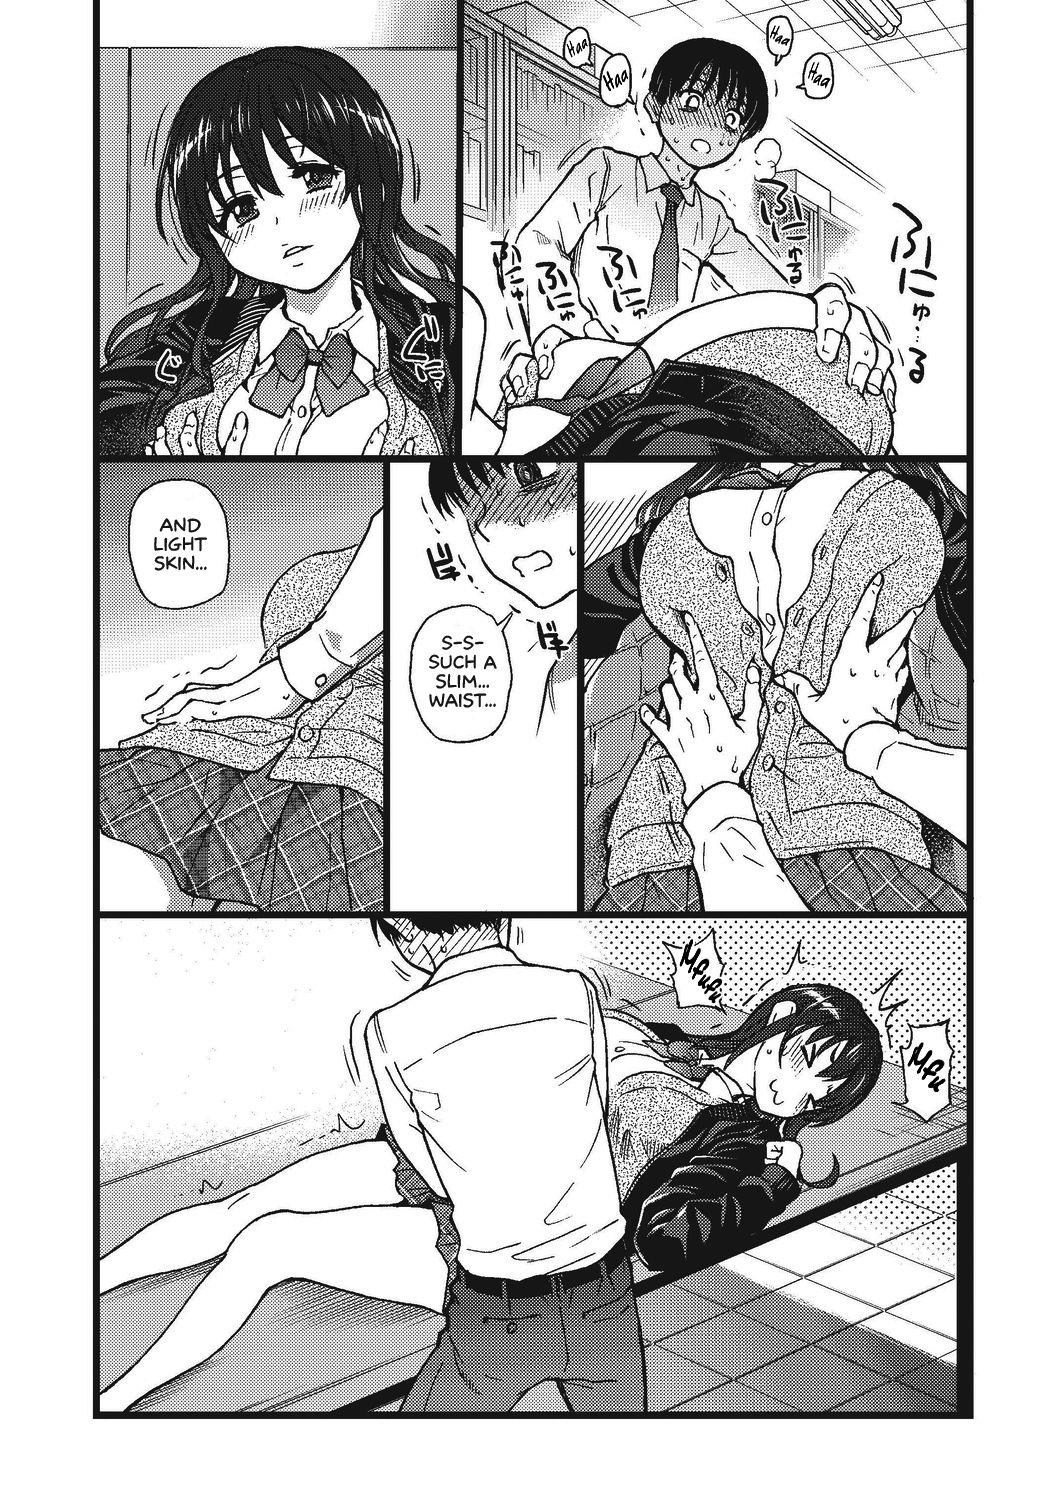 Lesbos Please! Freeze! Please! #3 Anime - Page 11